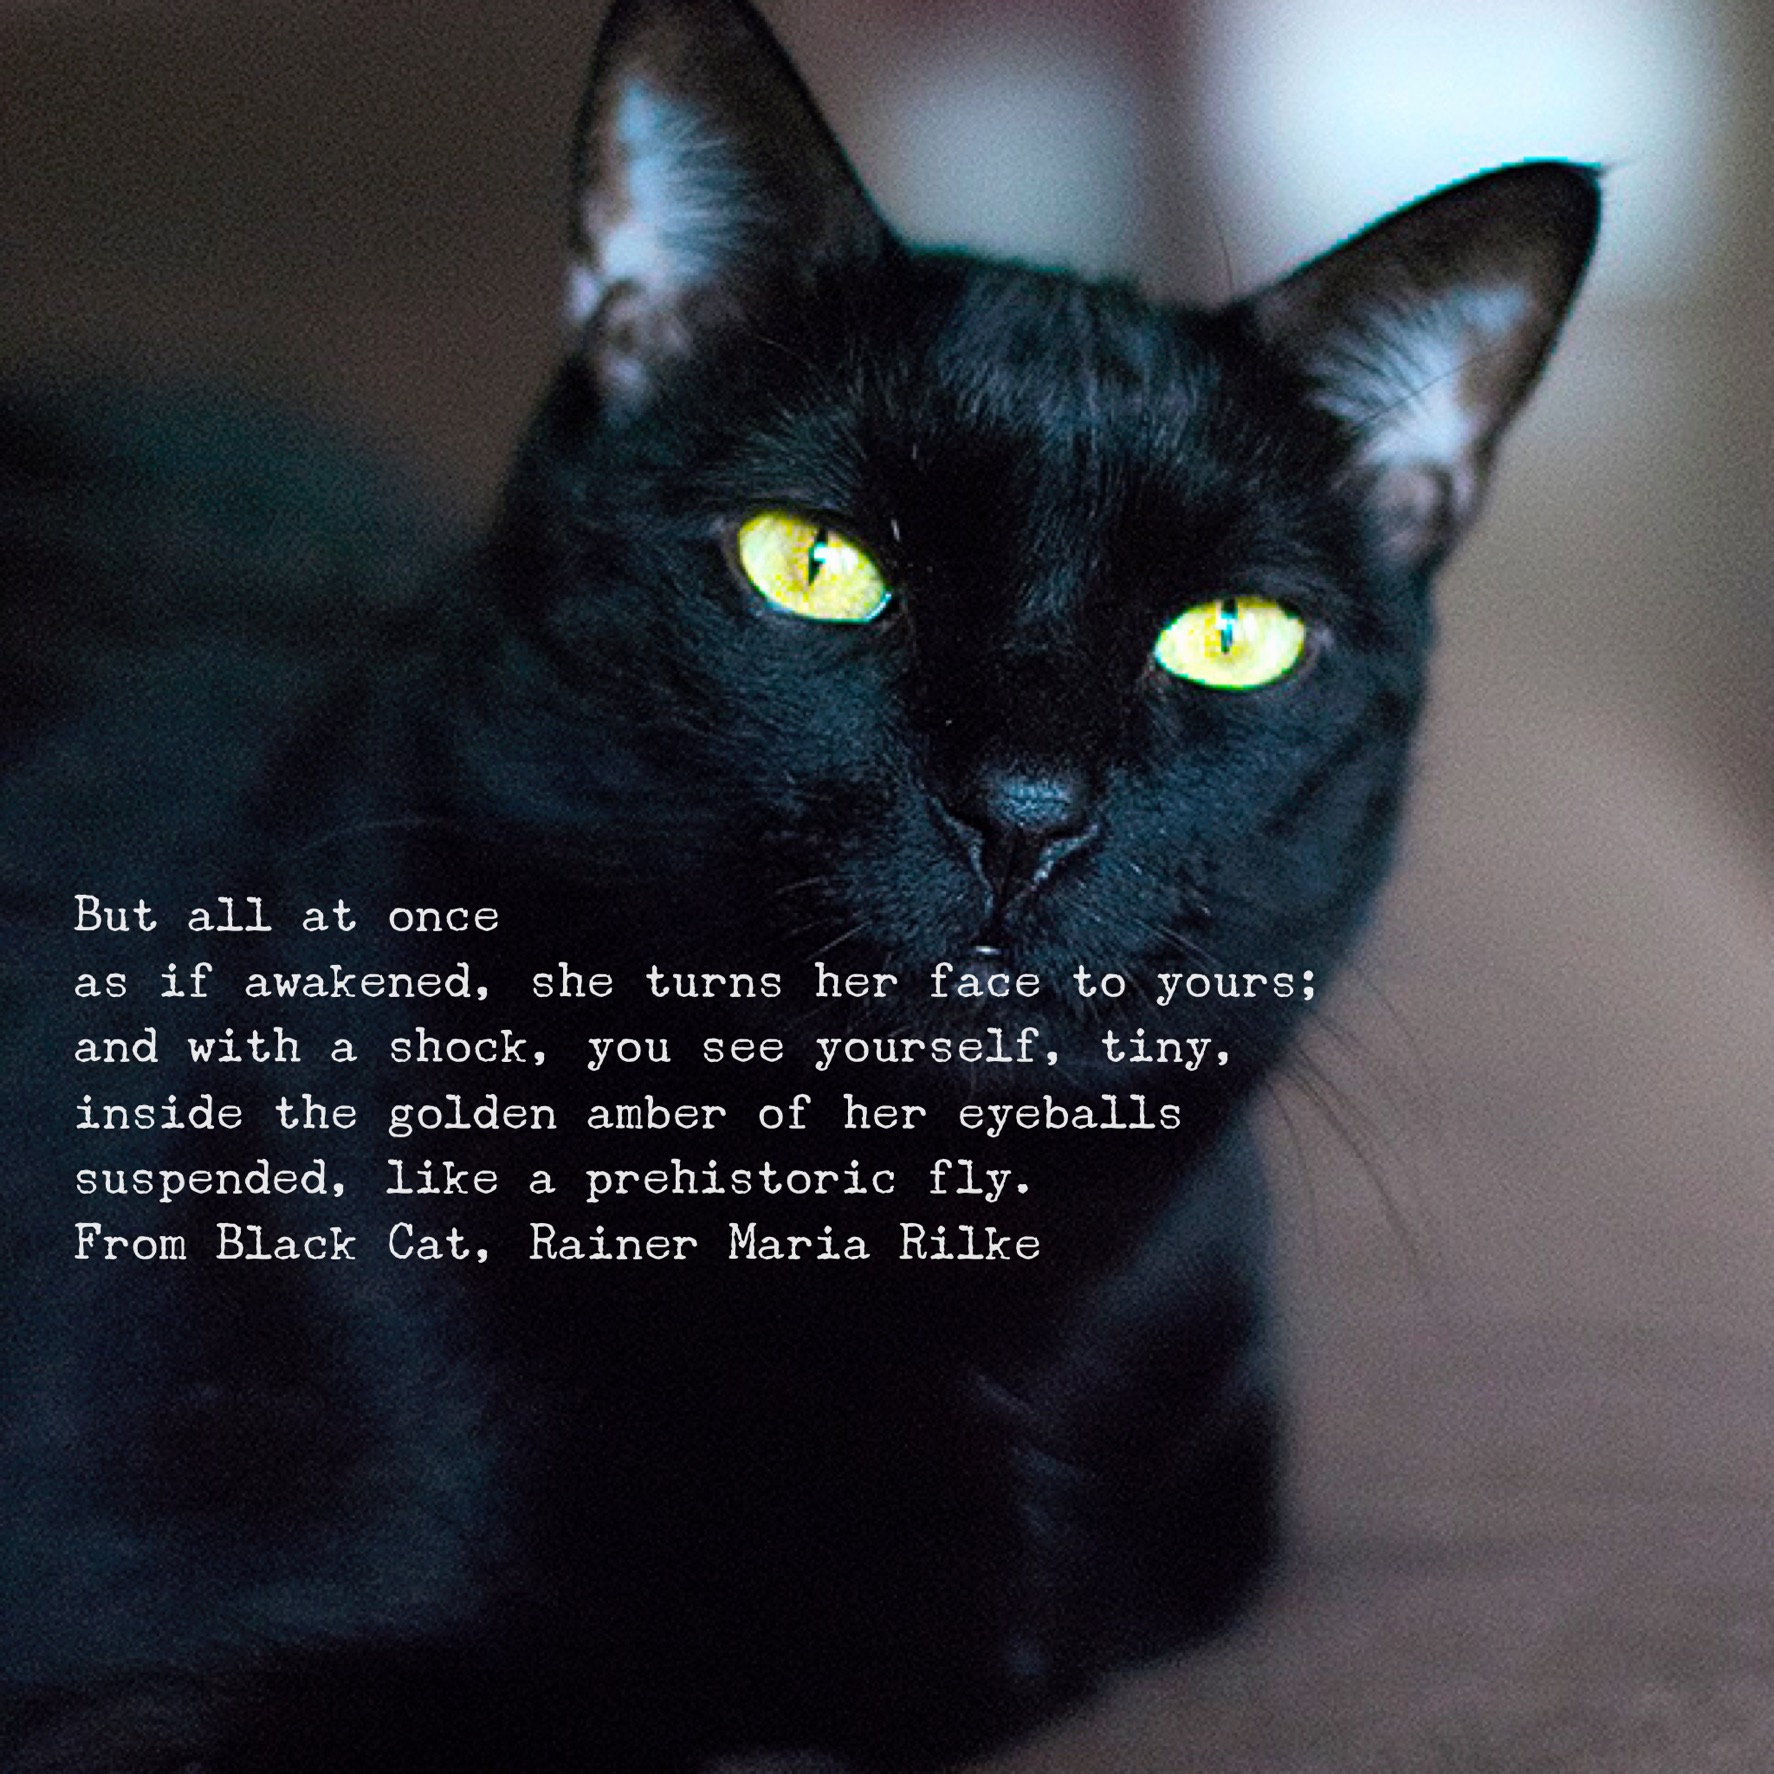 Fun with Word Swag. My cat Coco poses for Rilke's Black Cat.